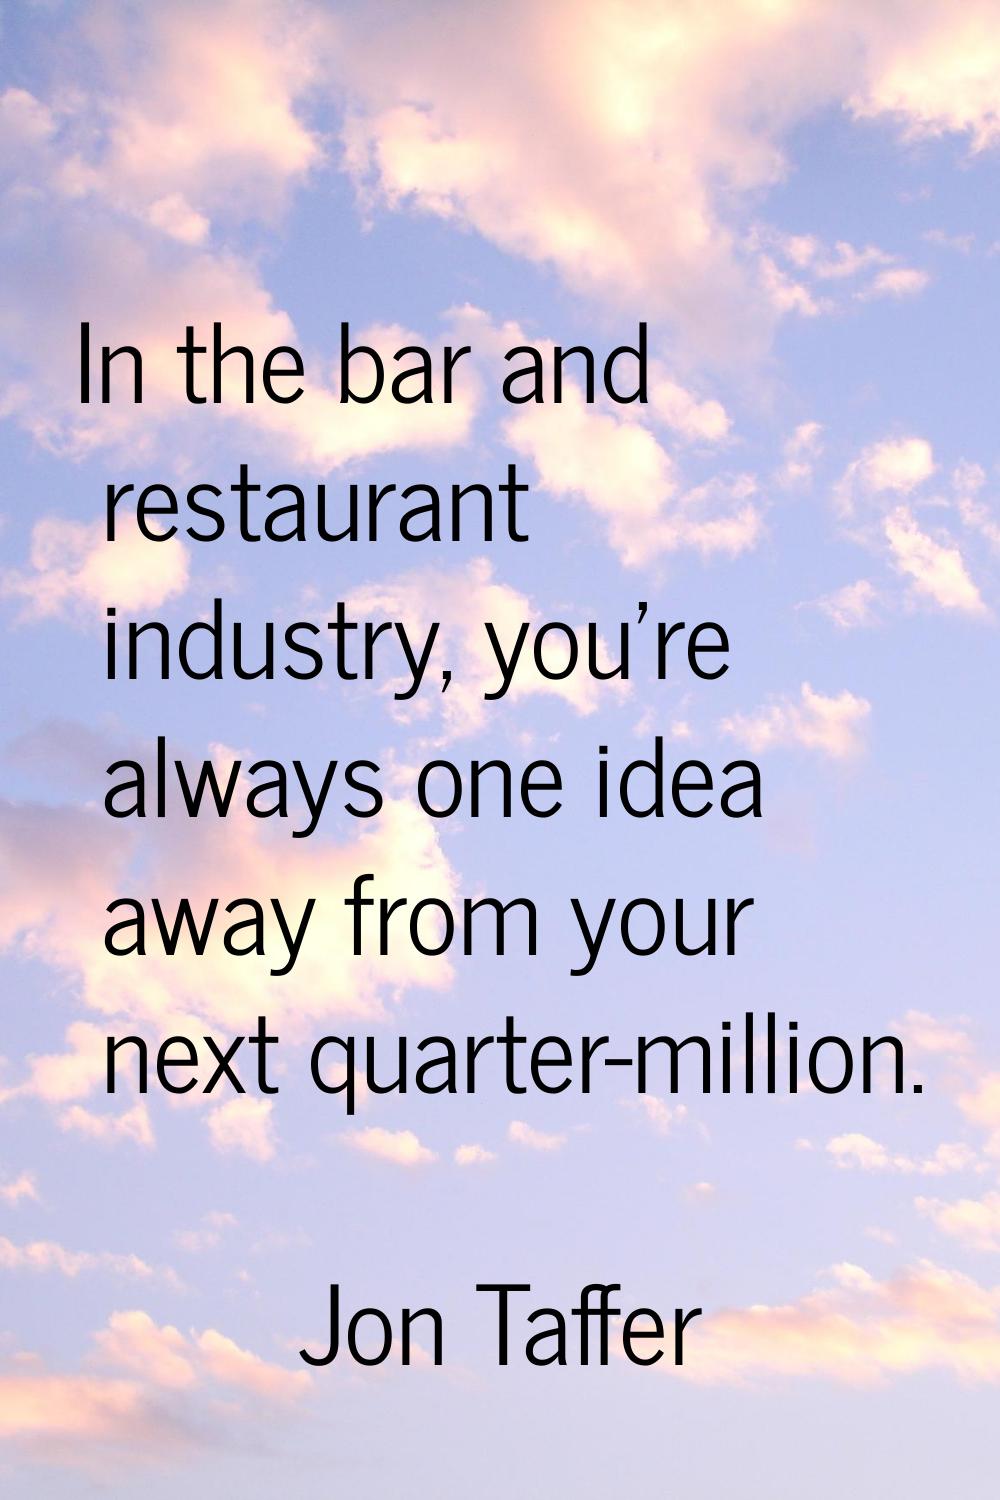 In the bar and restaurant industry, you're always one idea away from your next quarter-million.